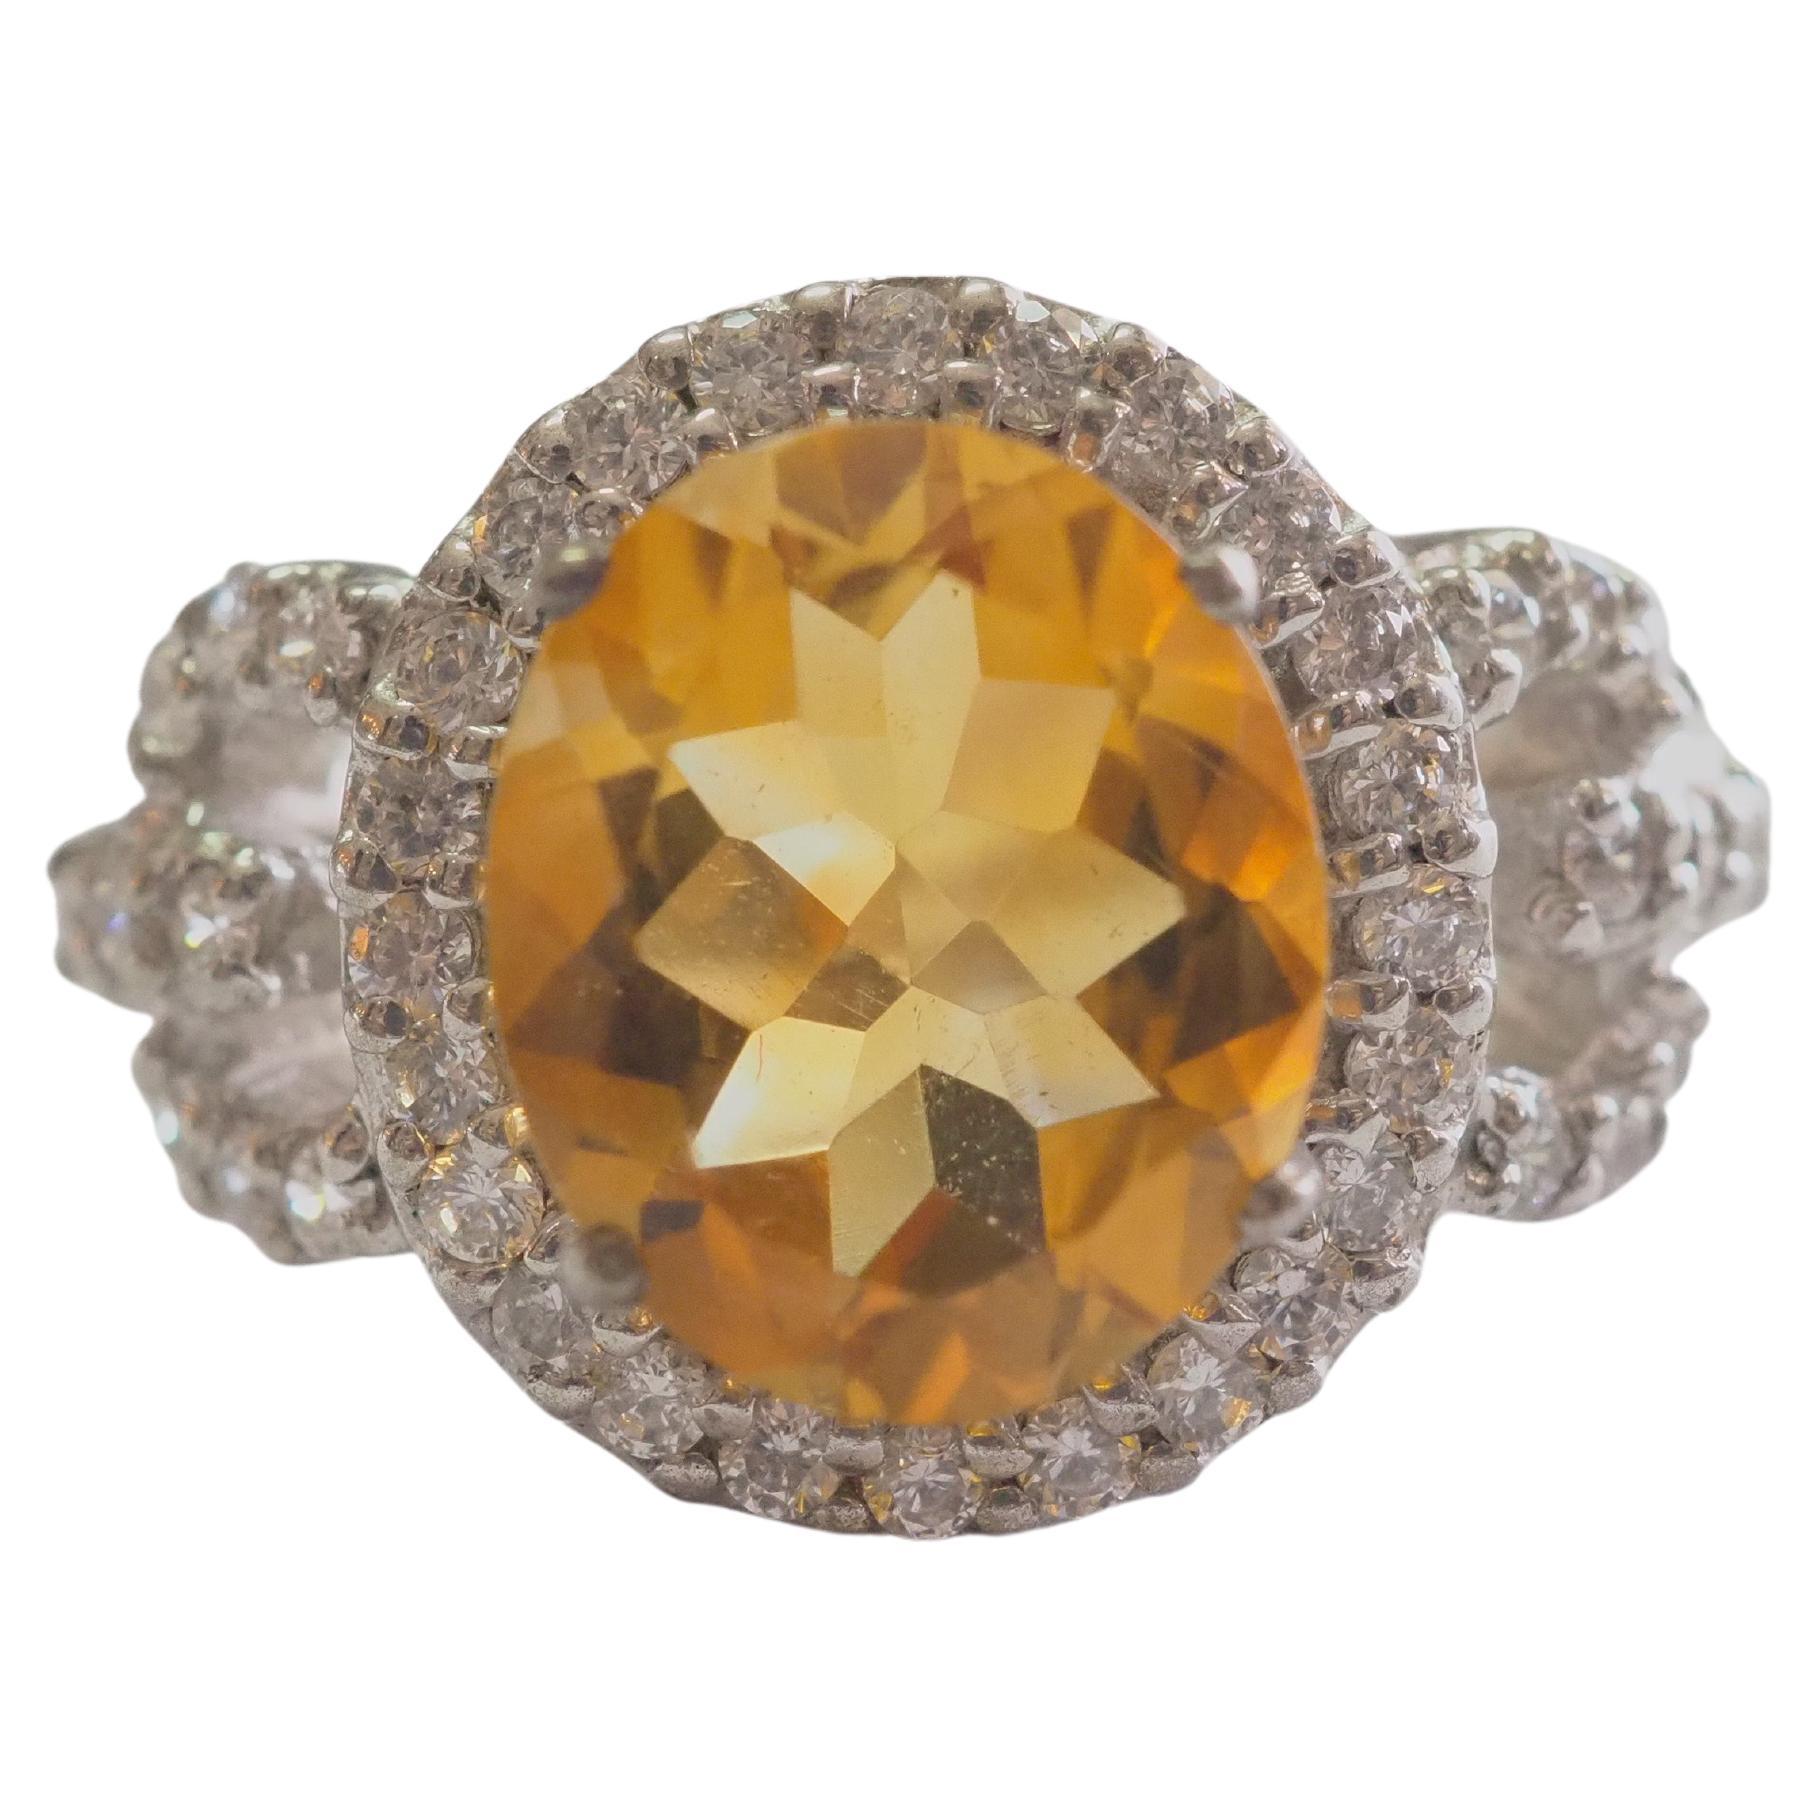 Cocktail 3.98ct Oval Citrine & CZ Sterling Silver Ring